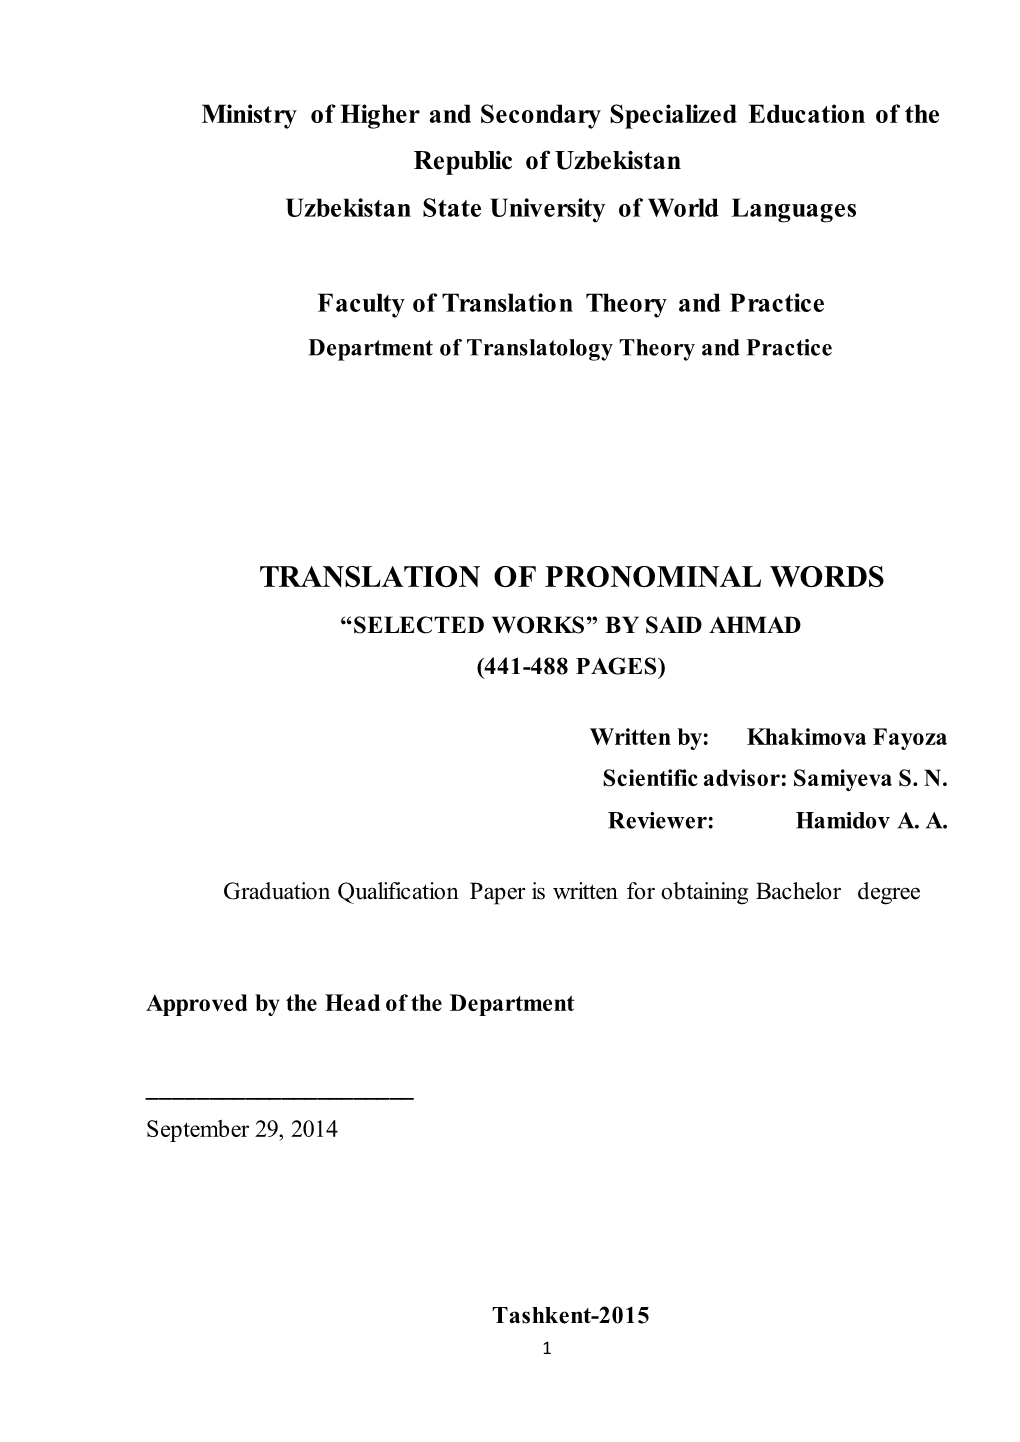 Translation of Pronominal Words “Selected Works” by Said Ahmad (441-488 Pages)